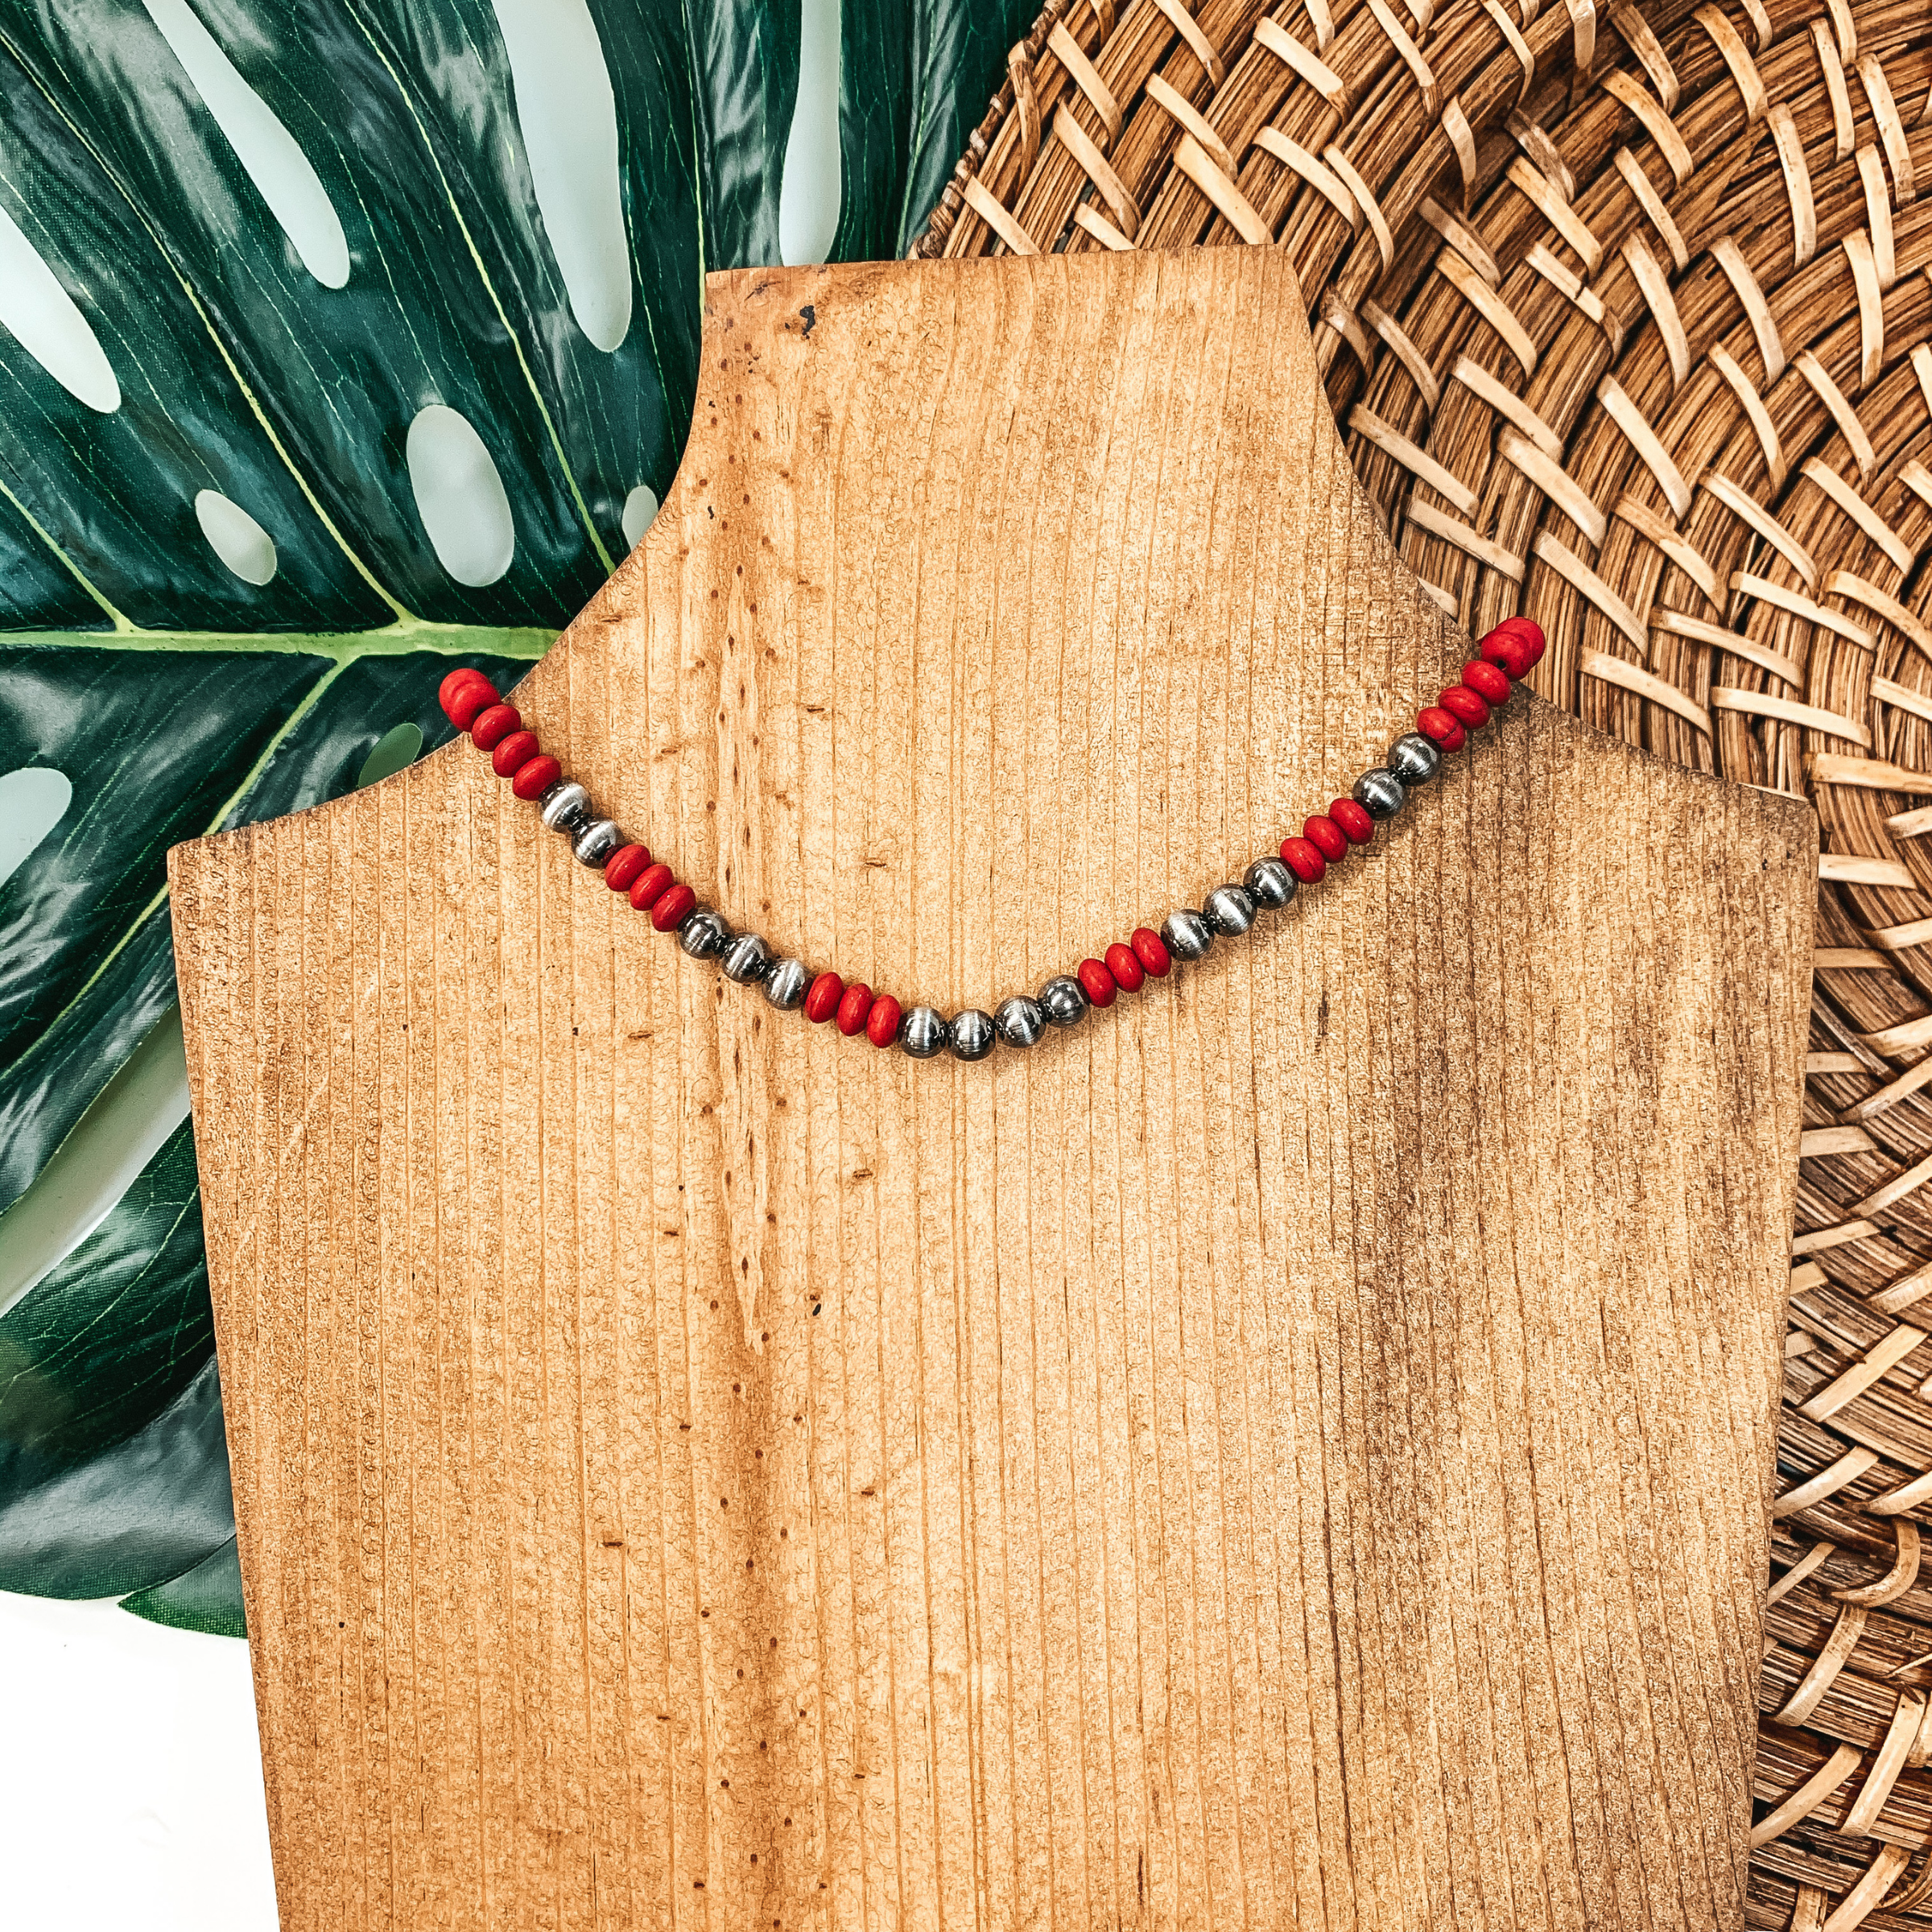 Beaded Stone Choker Necklace with Navajo Beads In Red - Giddy Up Glamour Boutique